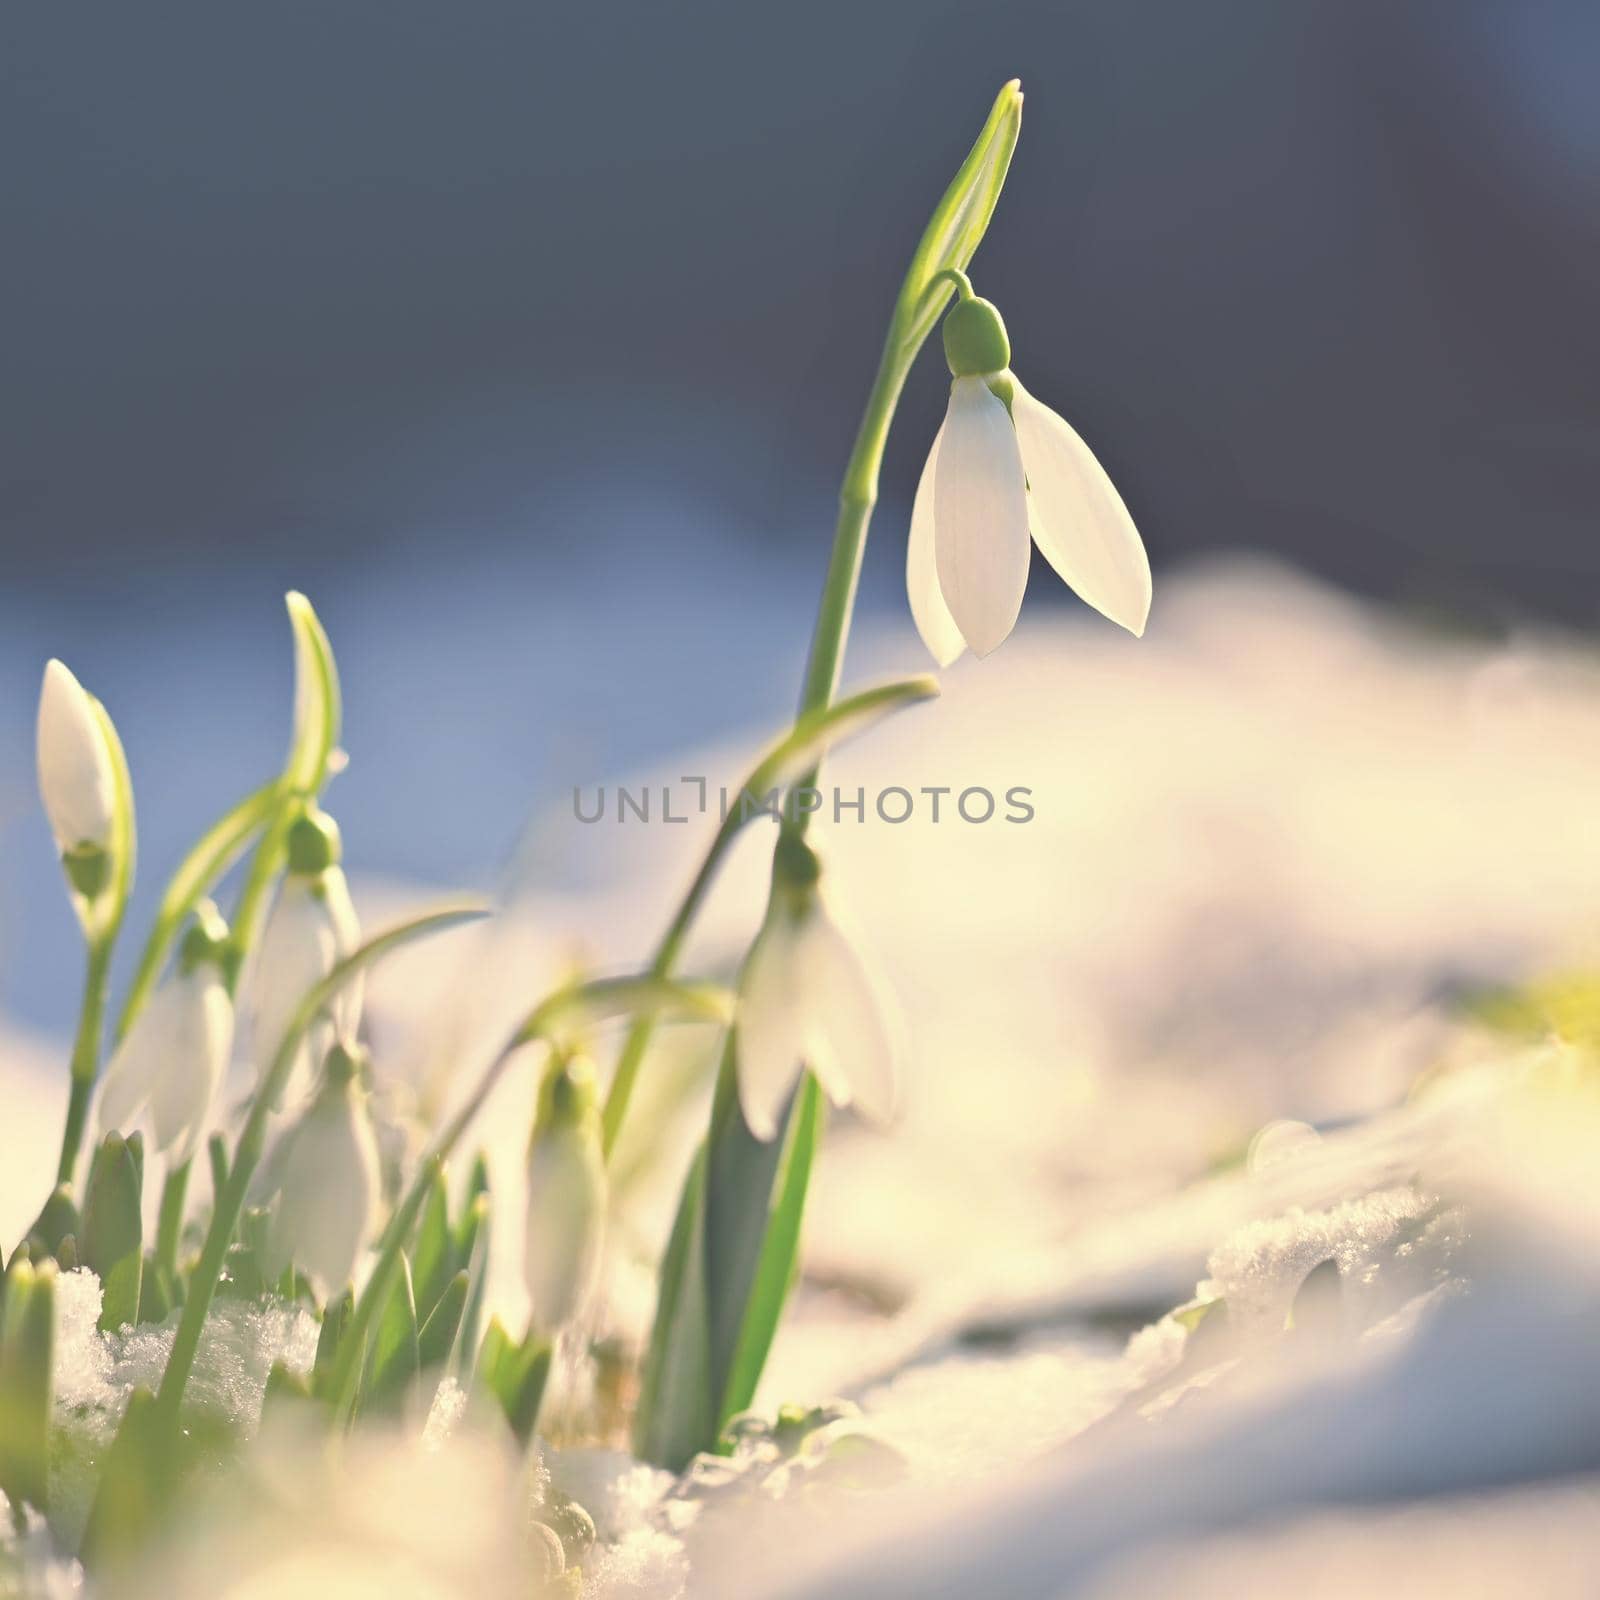 Snowdrops - Beautiful white spring flowers. The first flowering plants in spring. Natural colorful background. (Galanthus nivalis)